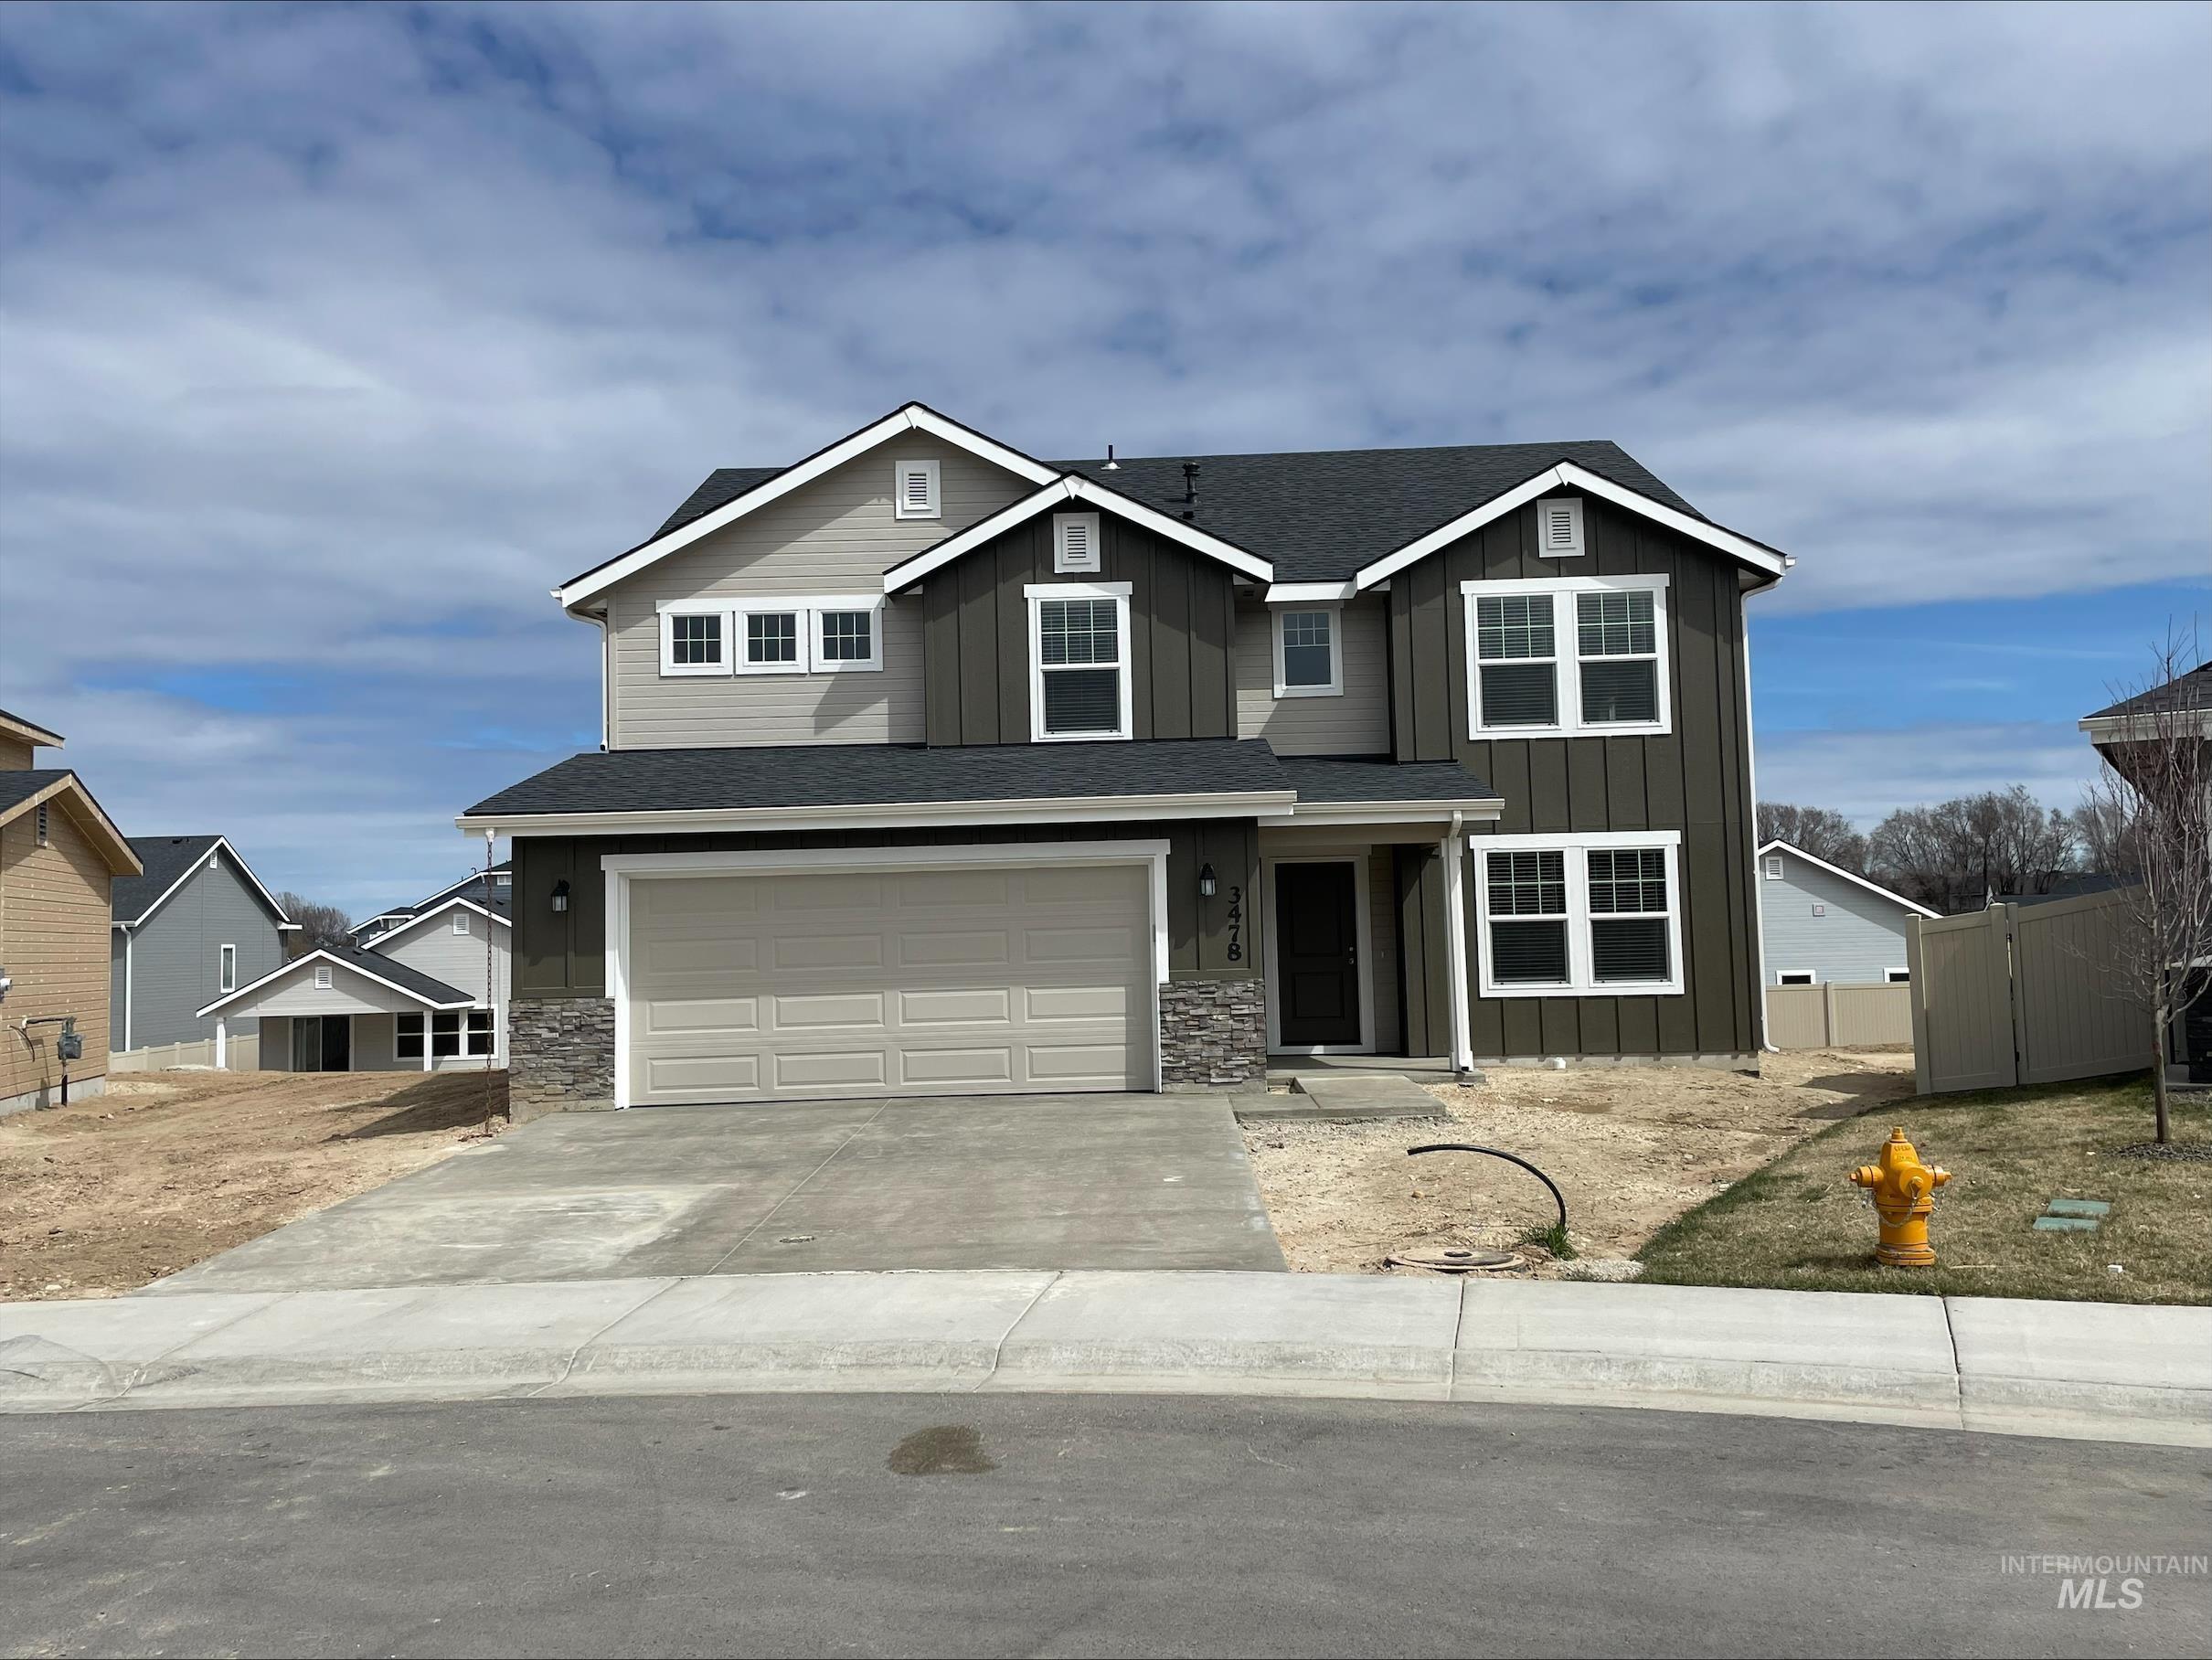 PRE SOLD Agate with Traditional Elevation. Photo similar. This home is HERS and Energy Star rated with annual savings! - Erika Magallon, Main: 208-870-0213, Hubble Homes, LLC, Main: 208-433-8800,